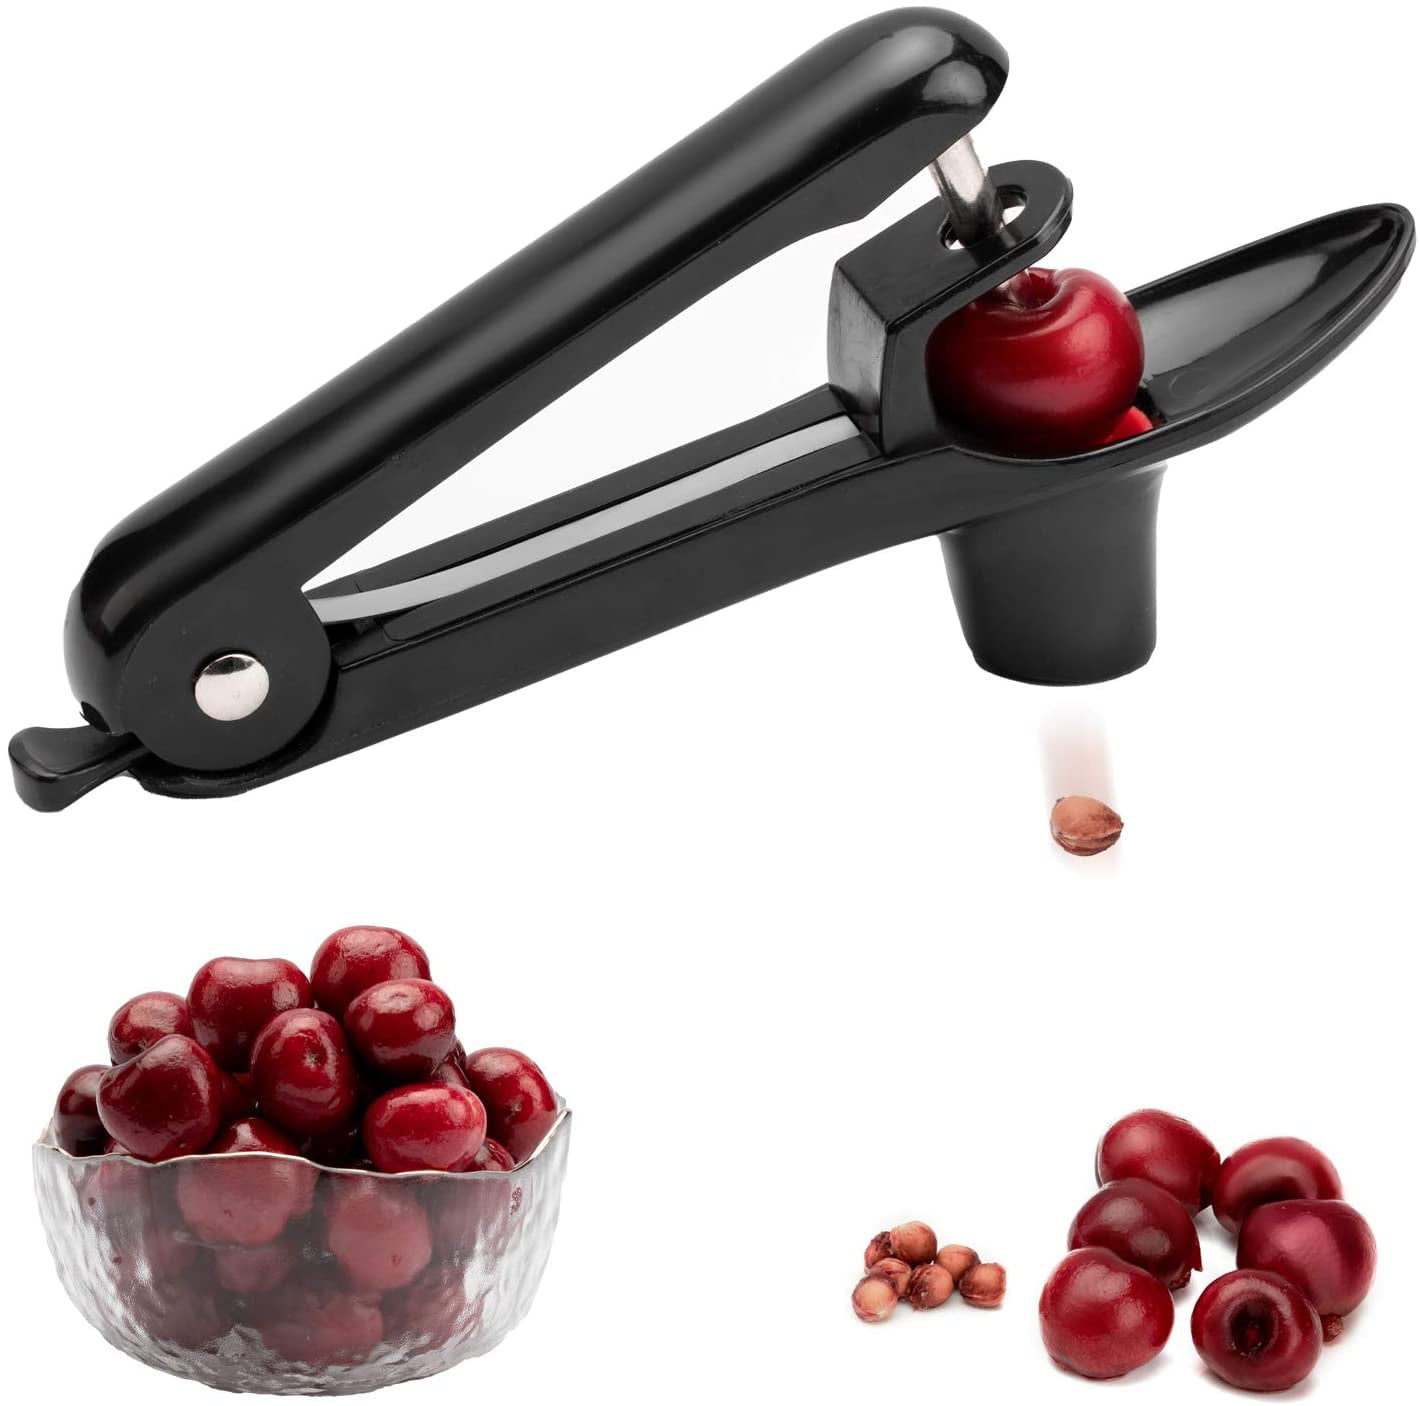 Portable Cherry Corer ABS Kitchen Tools Easy to Remove Cherry Pitter Red 